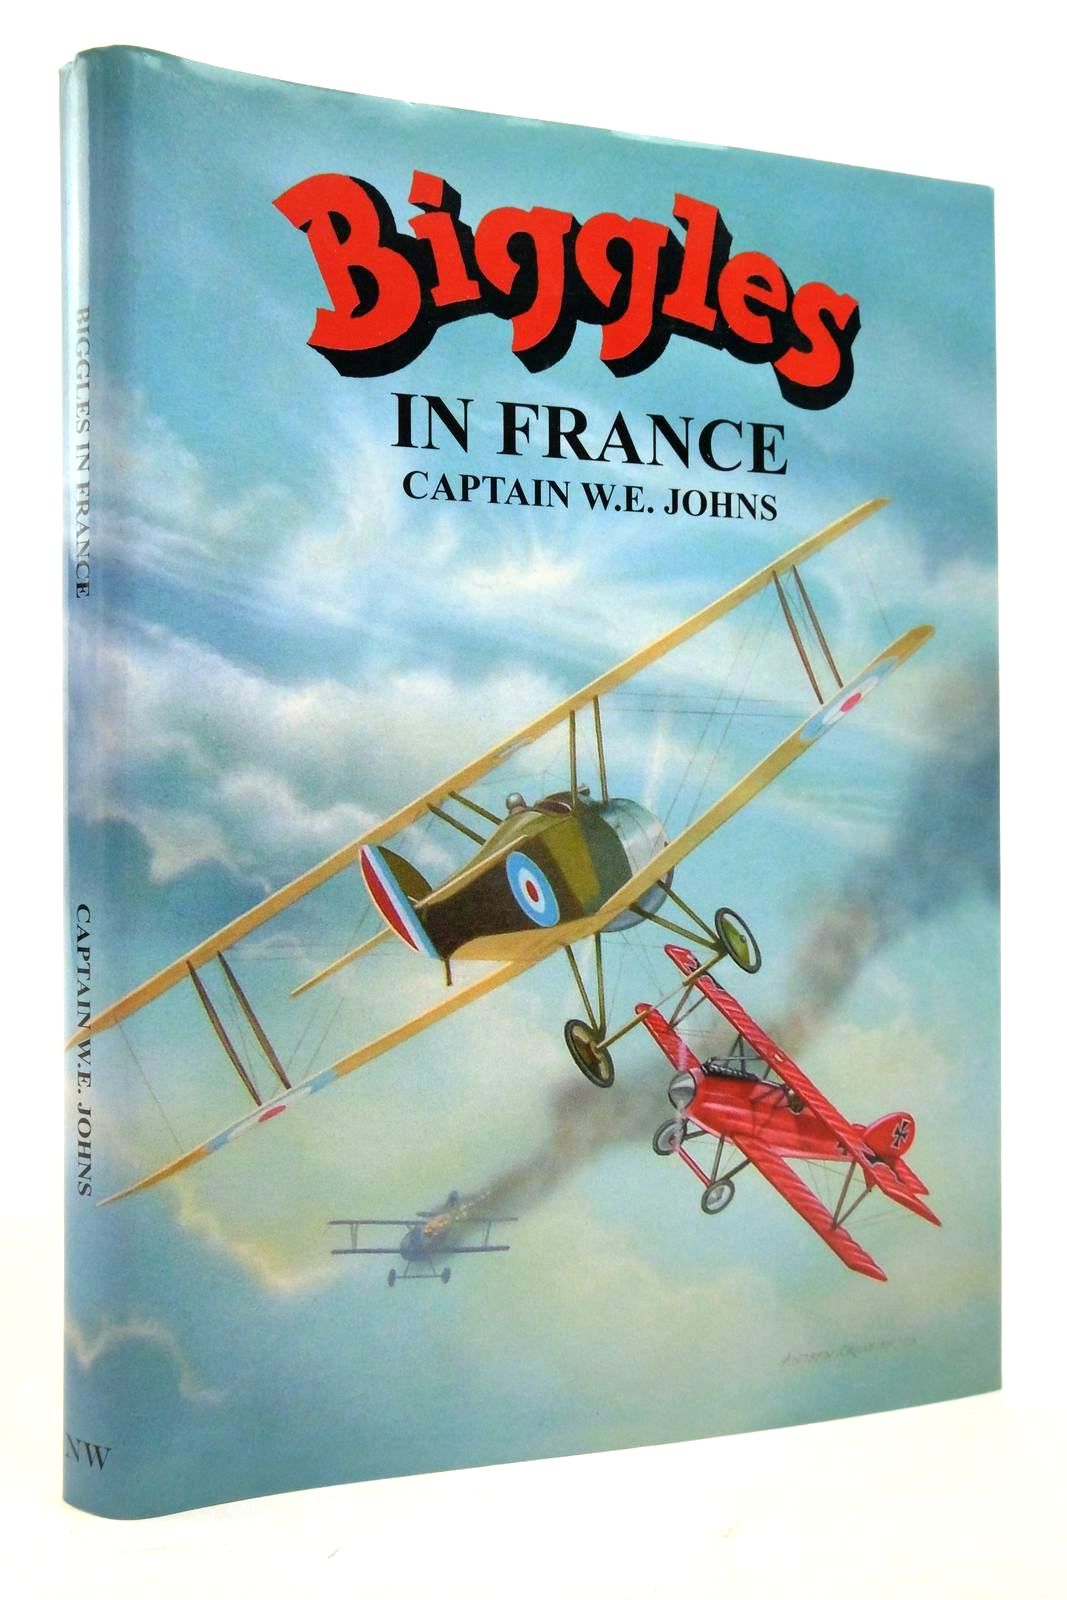 Photo of BIGGLES IN FRANCE written by Johns, W.E. illustrated by Skilleter, Andrew published by Norman Wright (STOCK CODE: 2138312)  for sale by Stella & Rose's Books